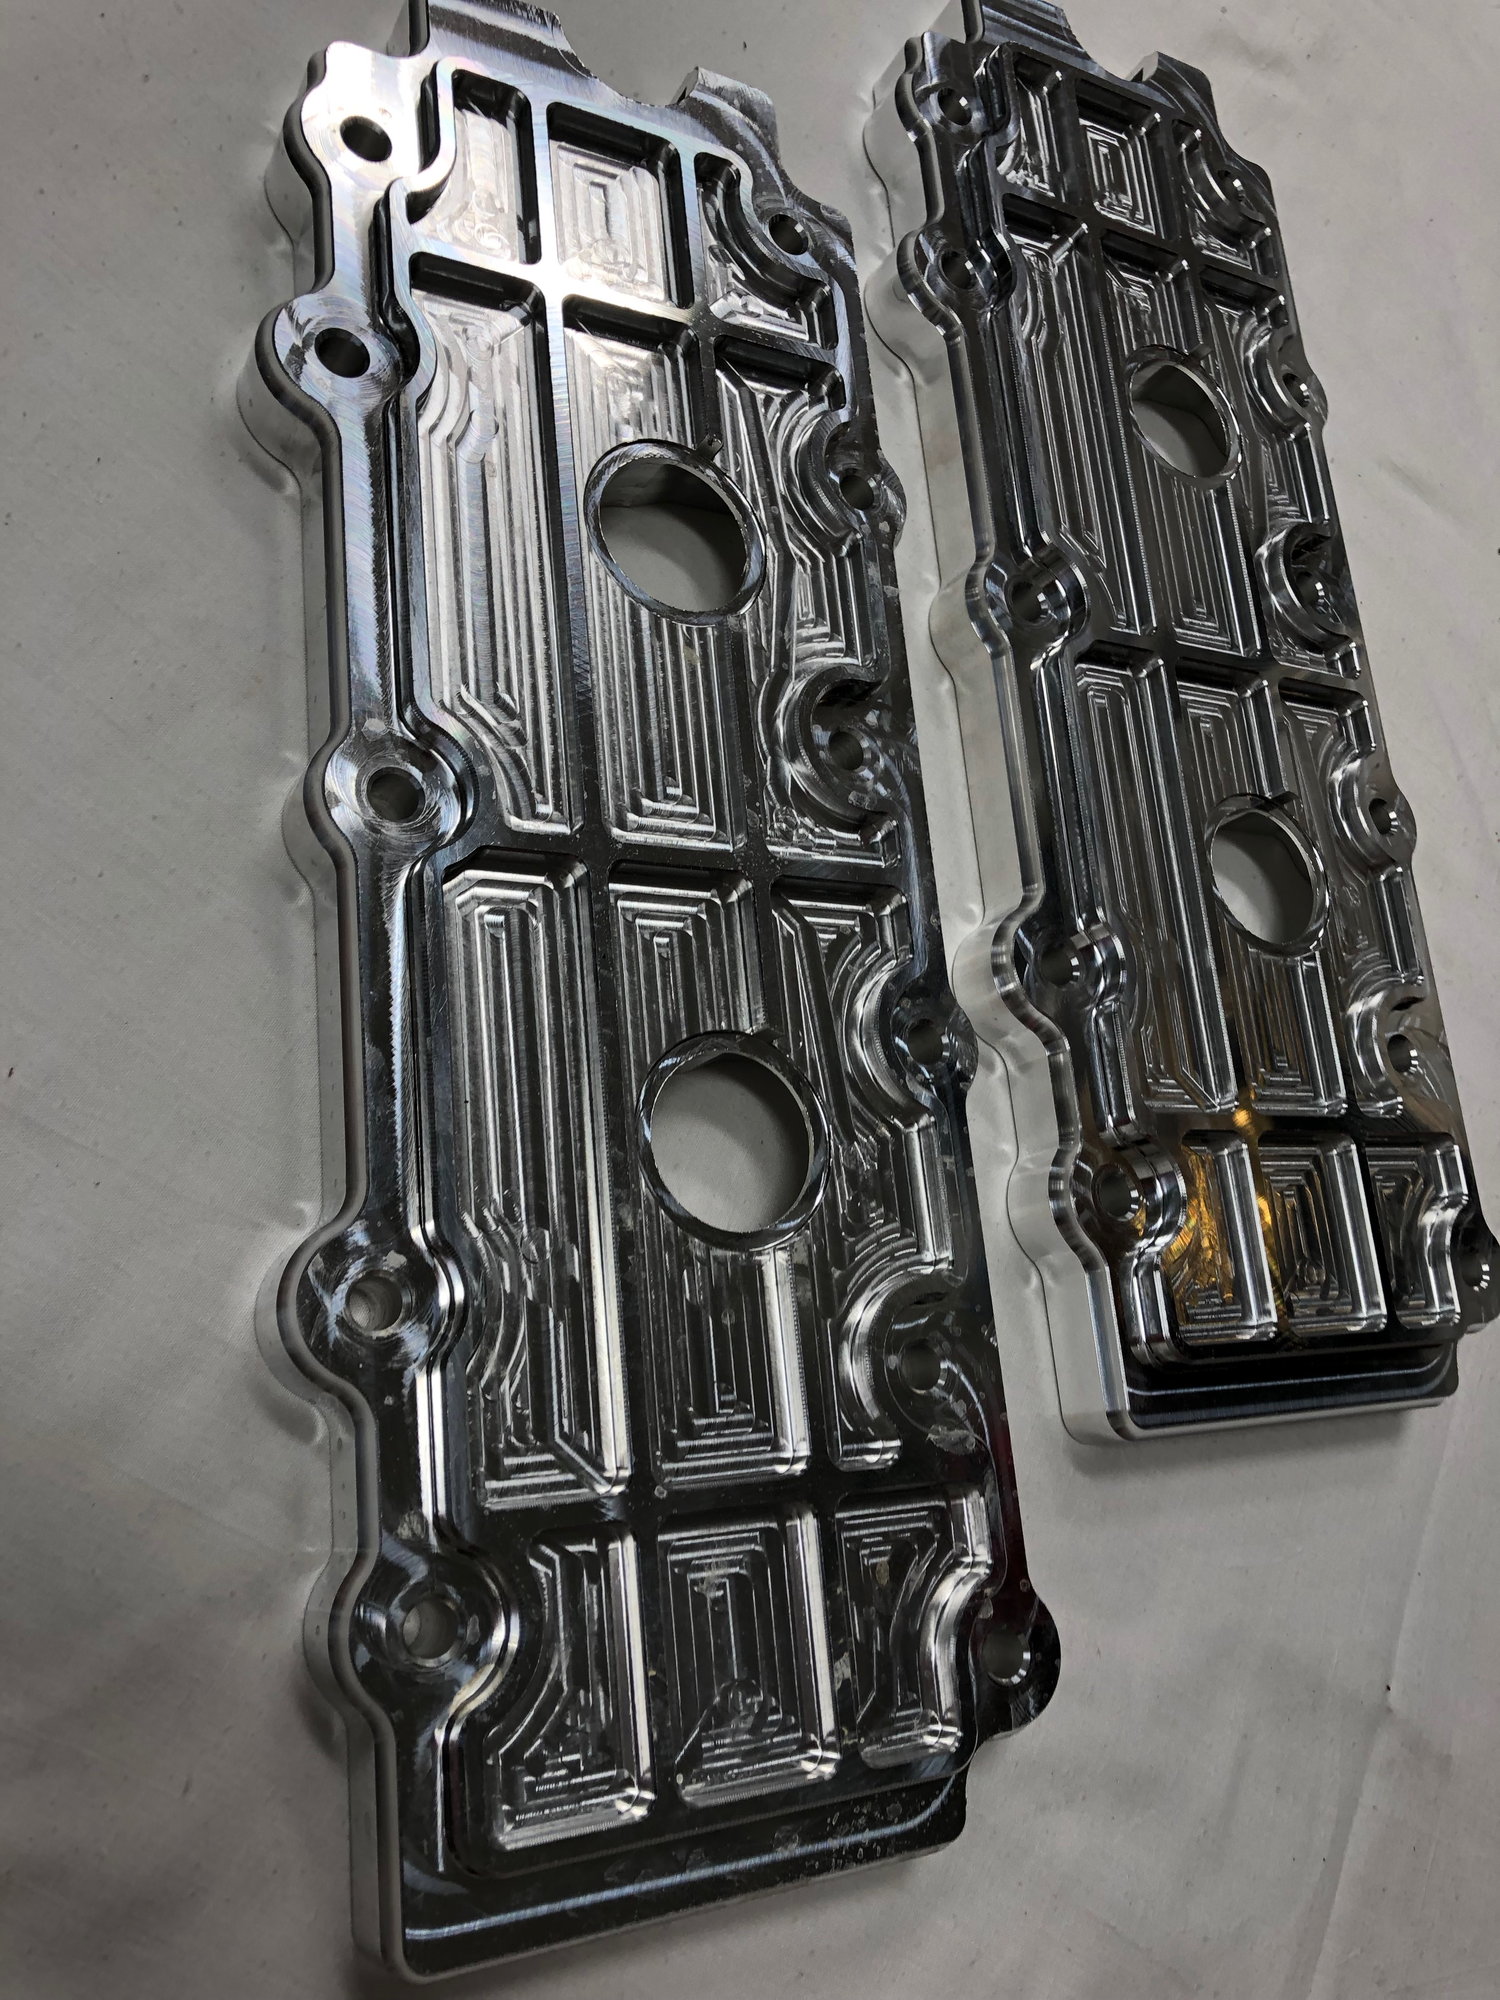 Miscellaneous - Hargett Precision billet aluminum 993 valve covers (lowers) with gaskets and hardware - New - 1995 to 1998 Porsche Carrera - Trabuco Canyon, CA 92679, United States